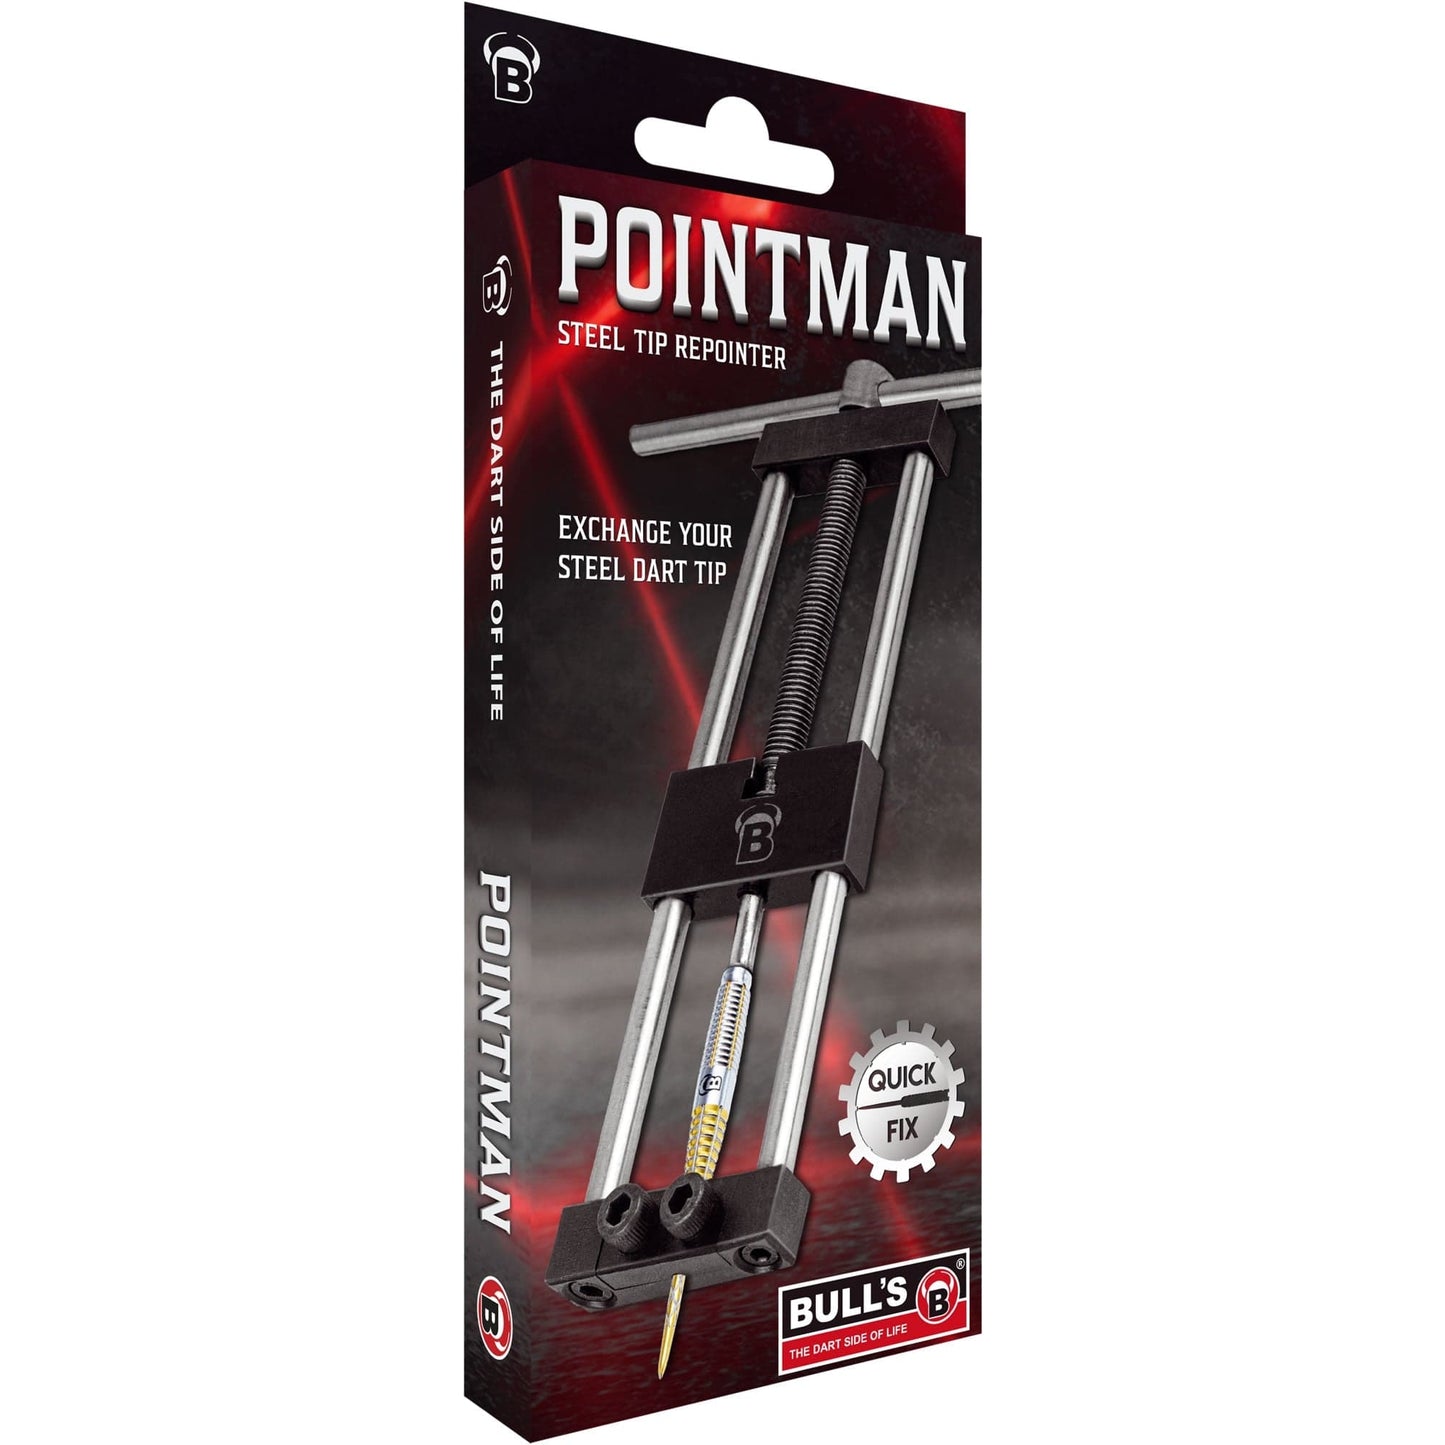 BULL'S Pointman Repointer - Easy to Use - Steel Tip Repointing Machine